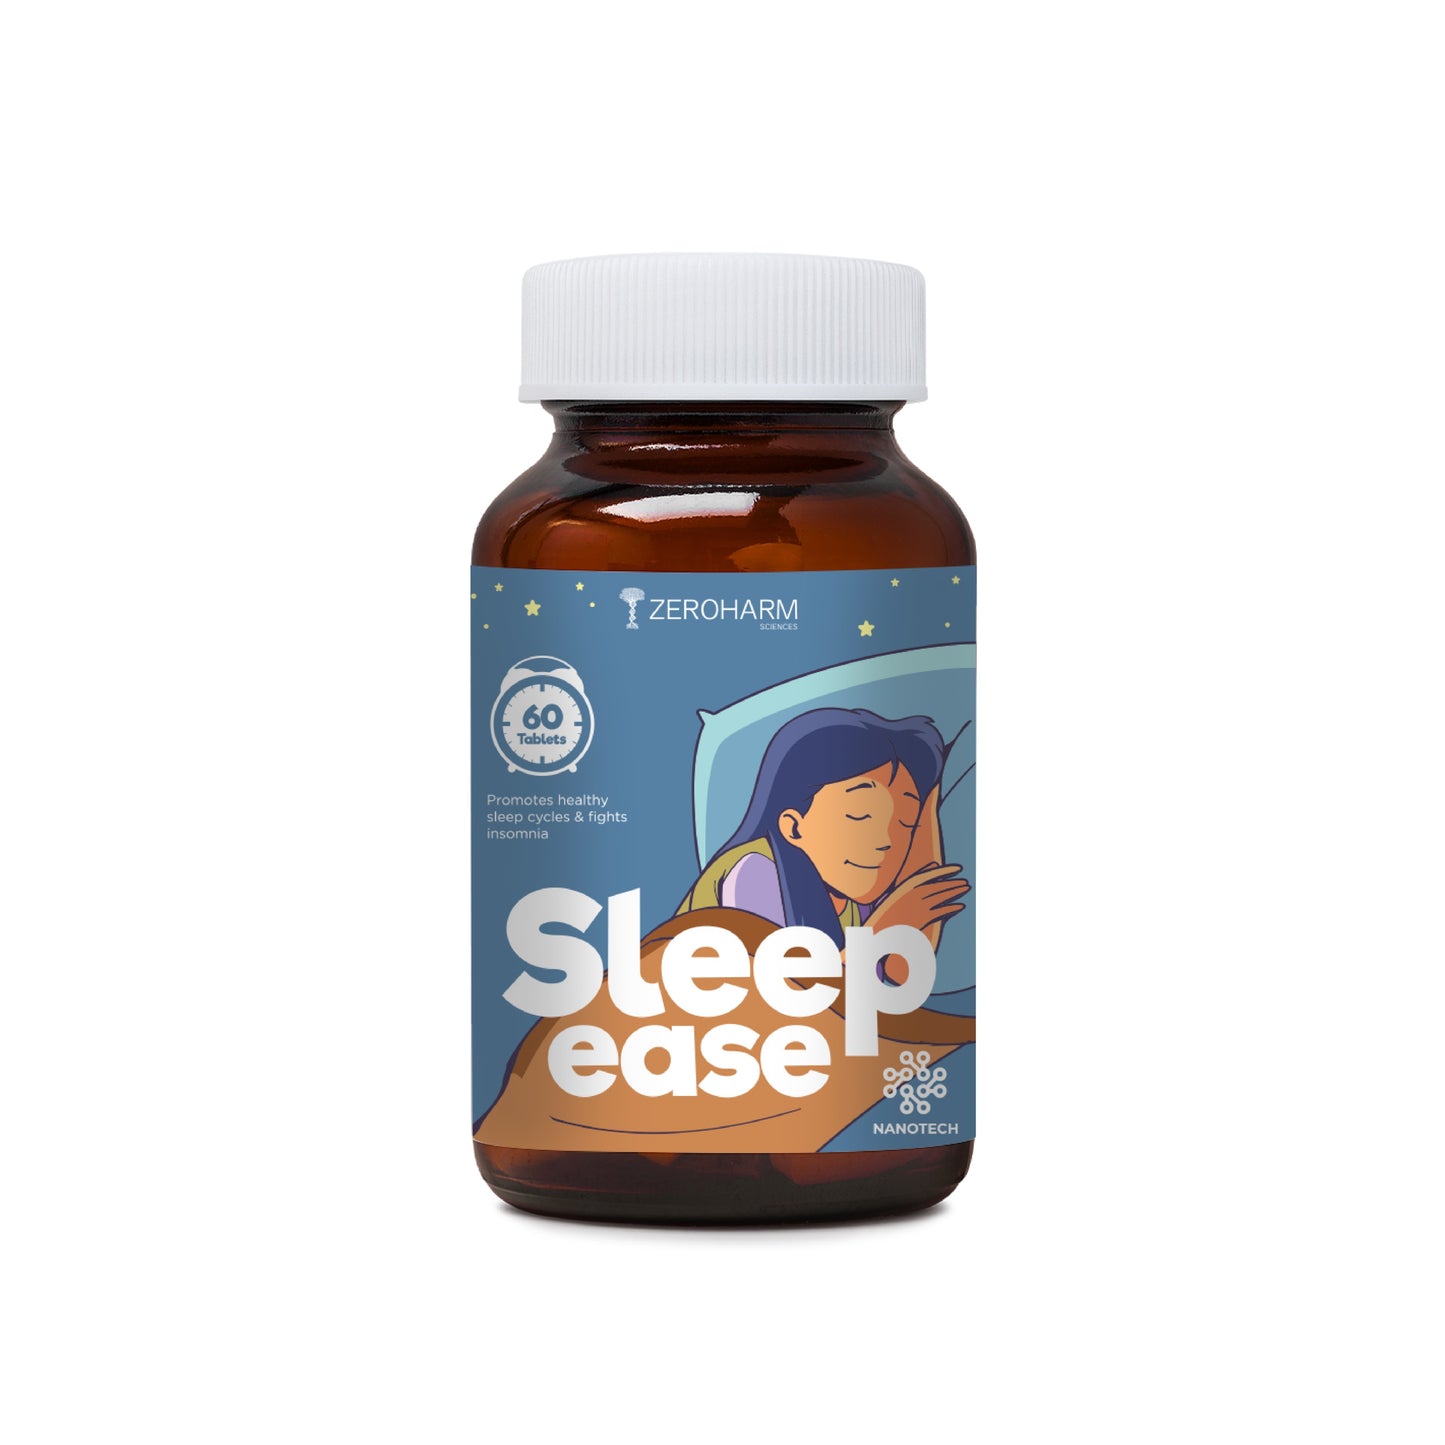 one glass bottle of plant based sleeping tablets